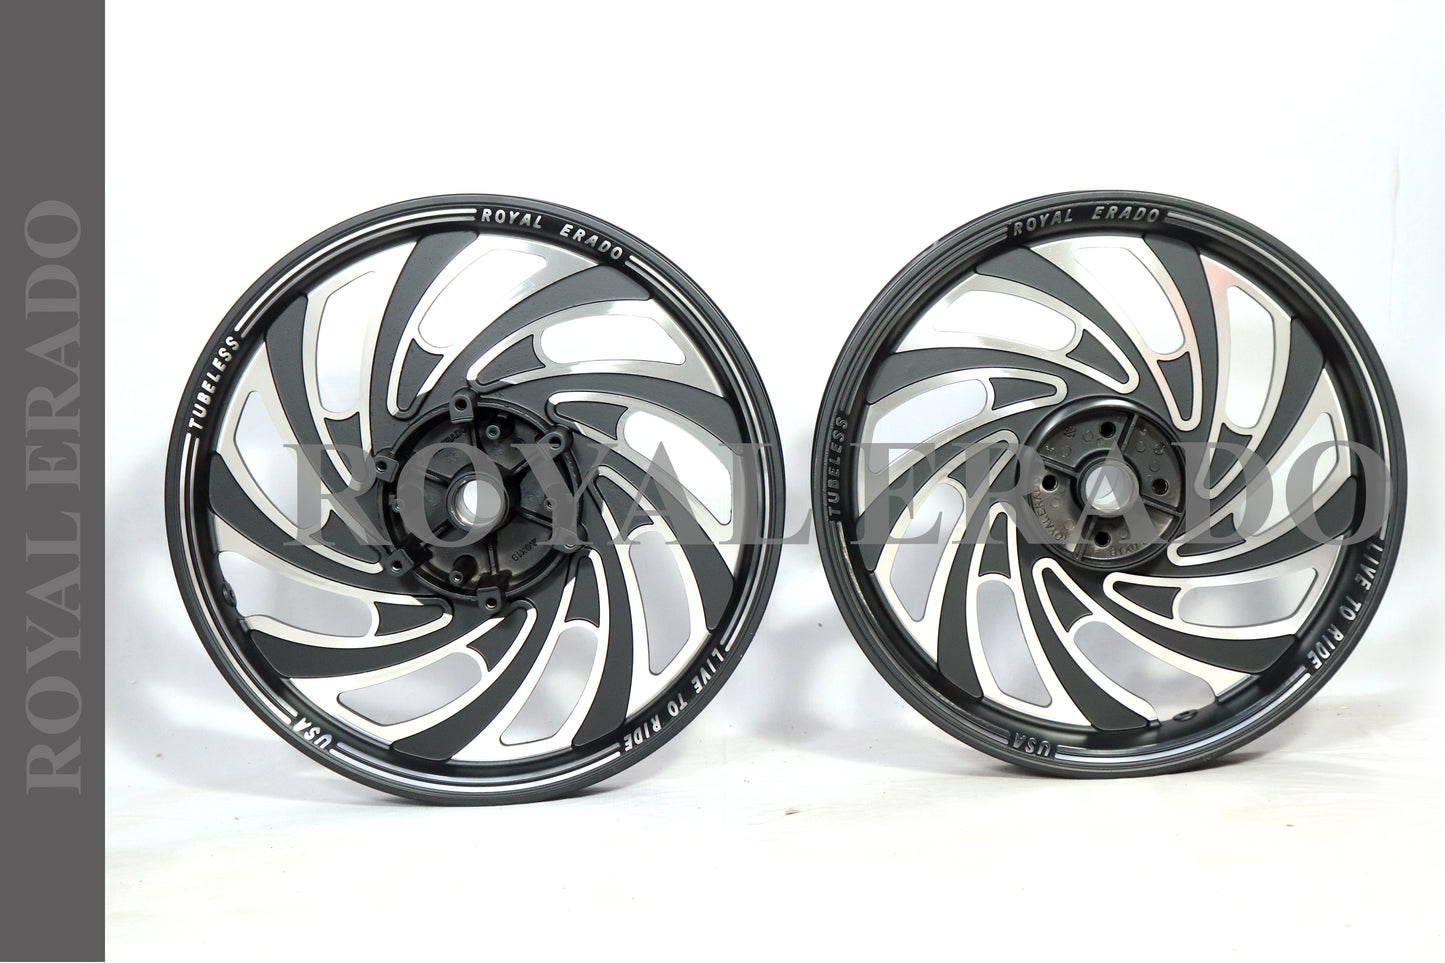 LIVE TO RIDE Alloy Wheel set for classic single disc